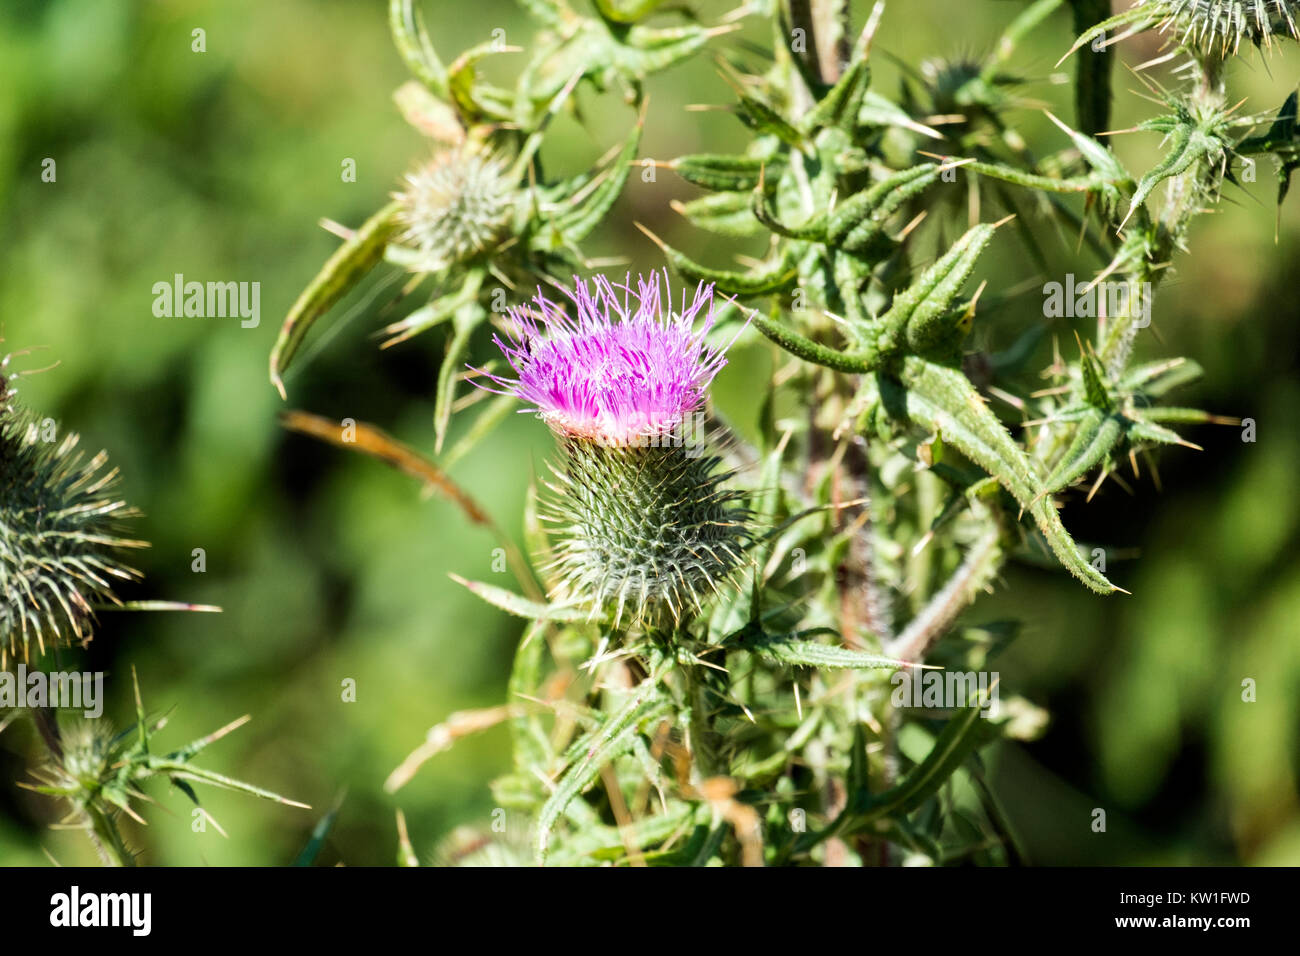 Purple flower of spiny plumeless thistle (Carduus acanthoides) Stock Photo